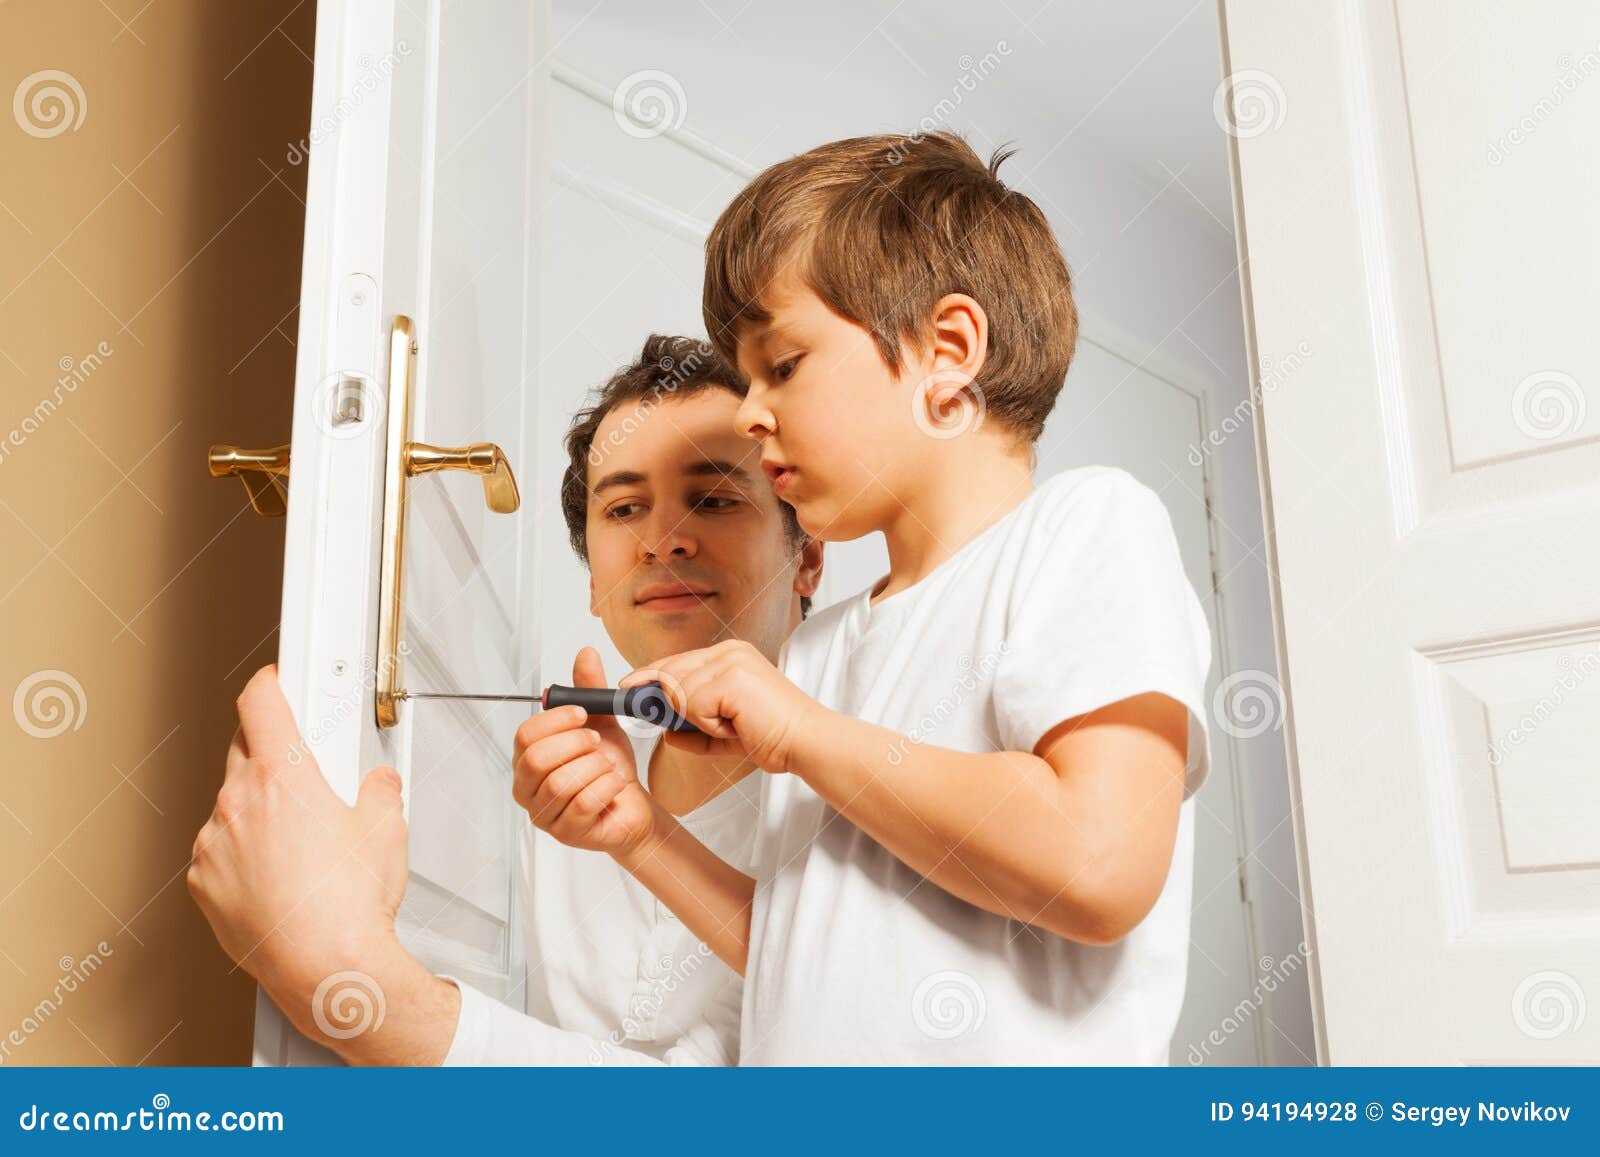 young father helping his son to fix door-handle